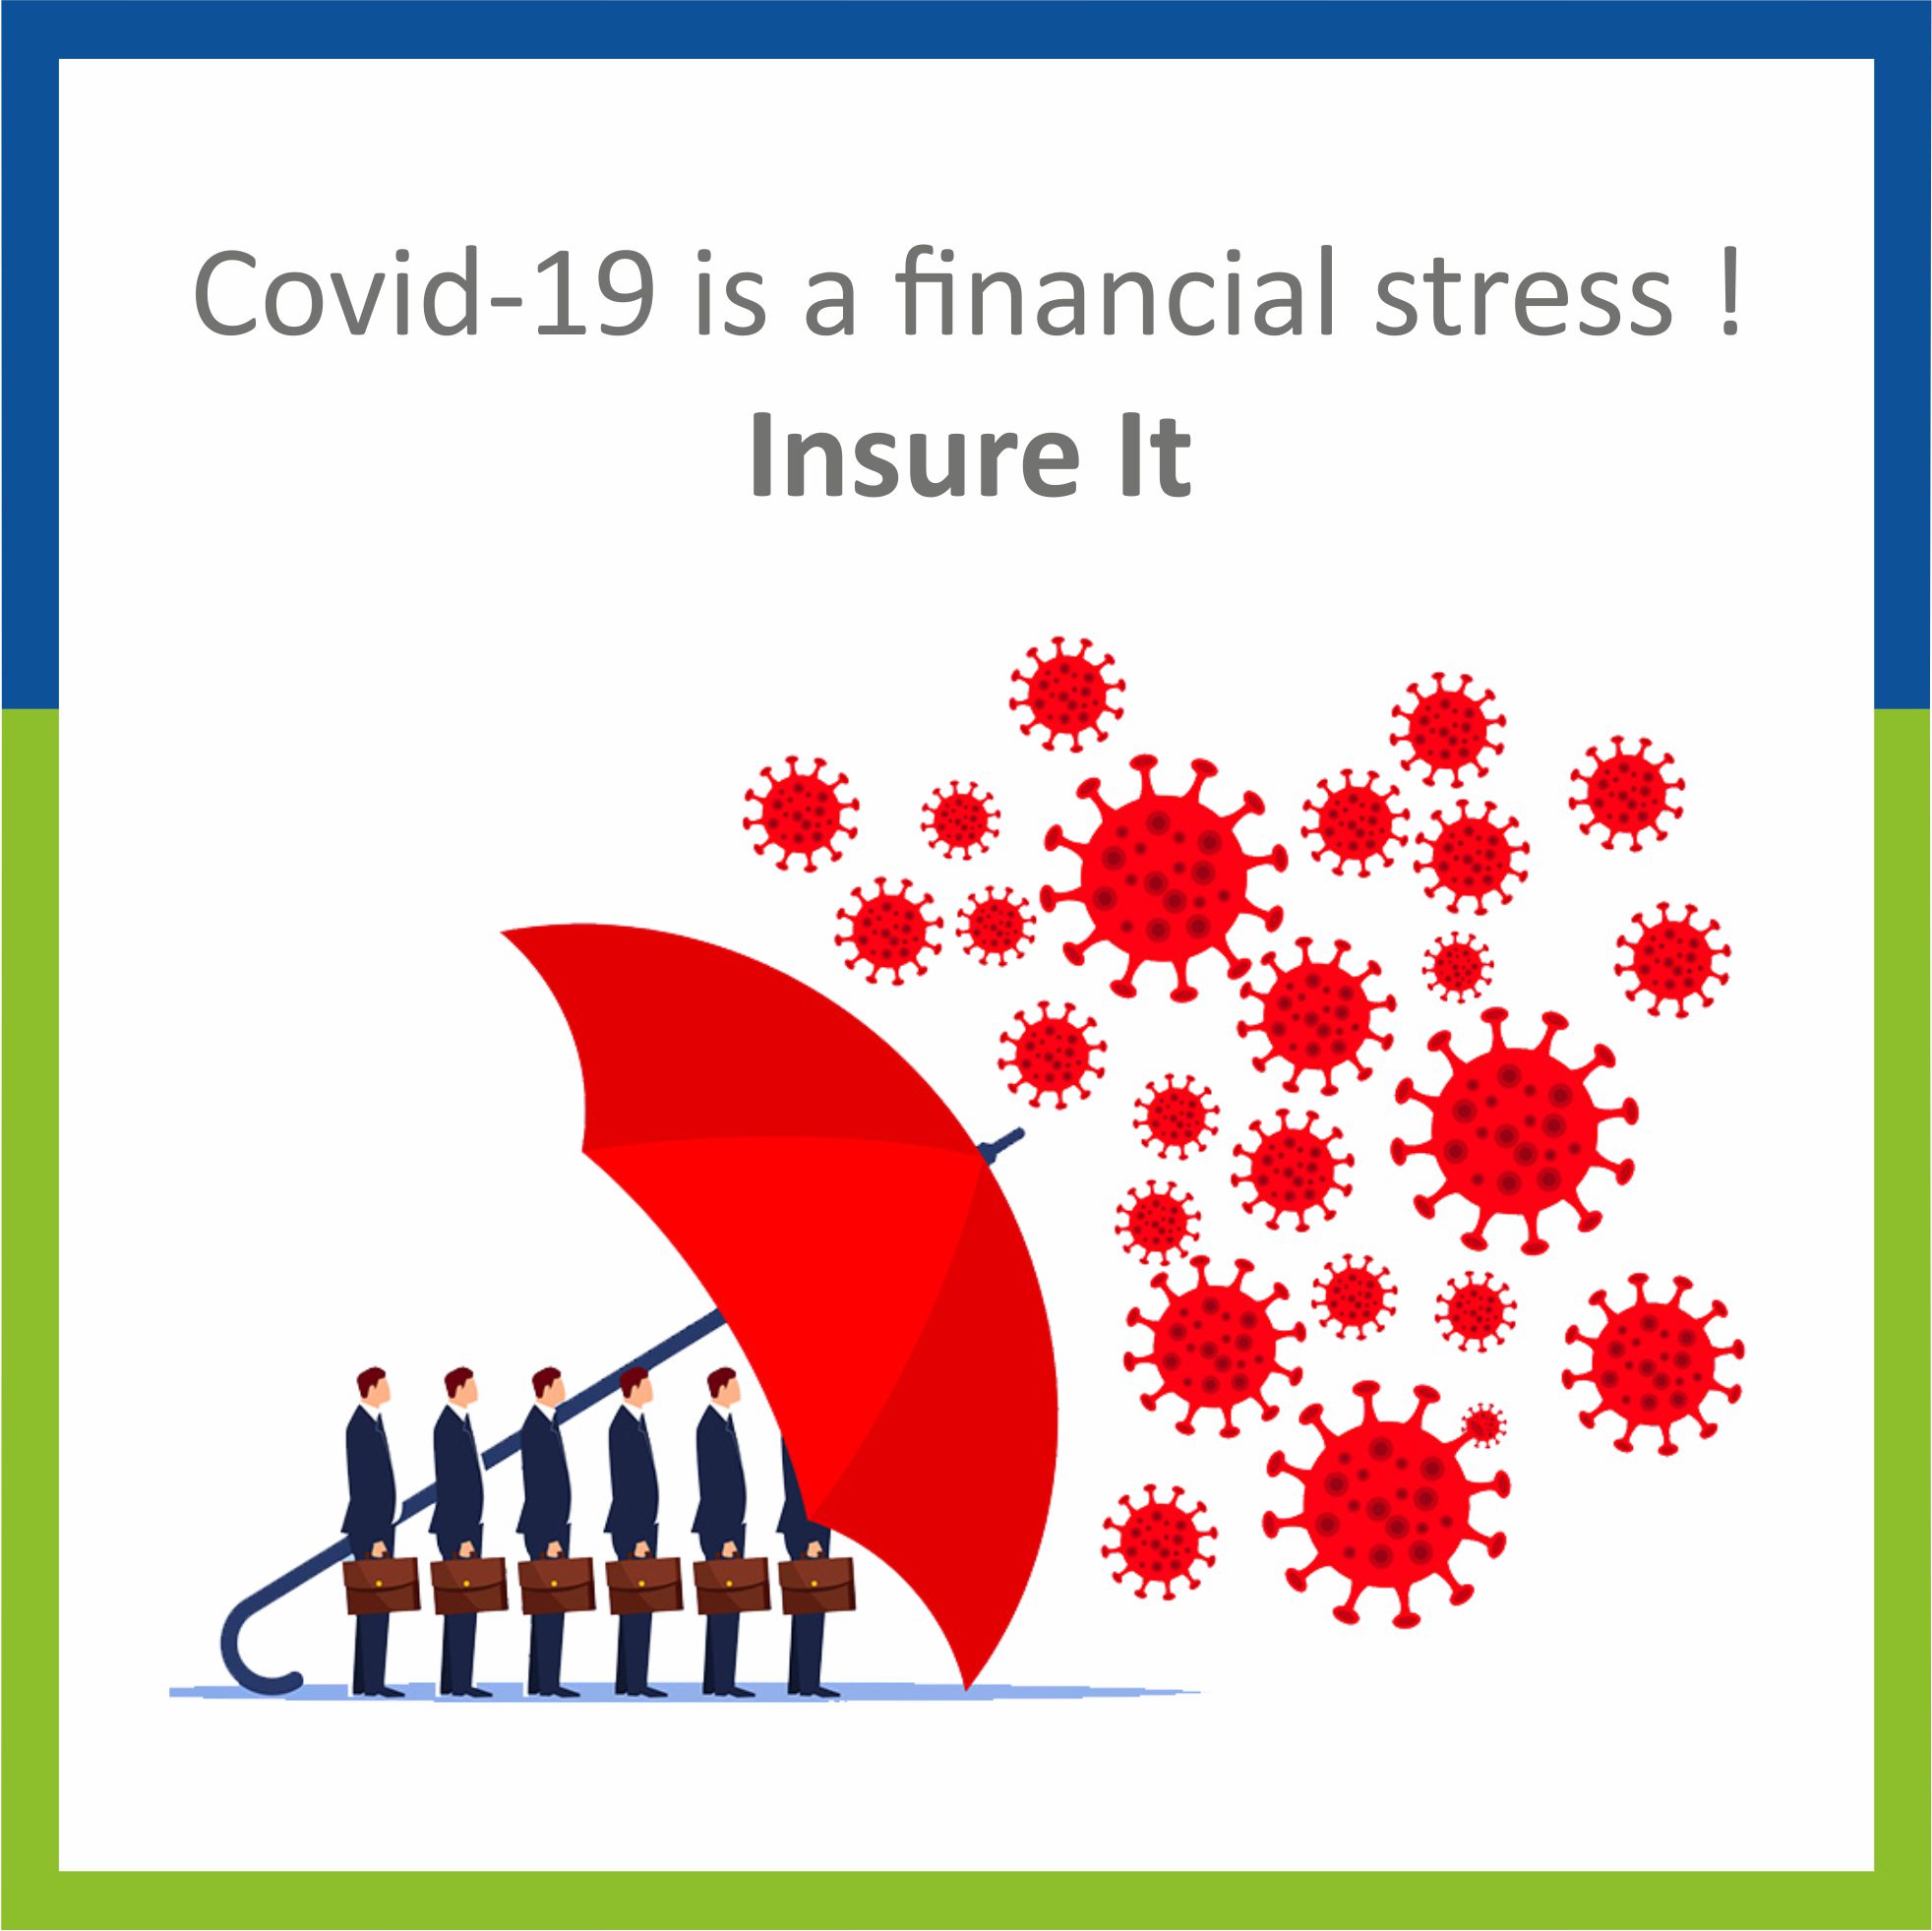 Covid-19 is a financial stress!